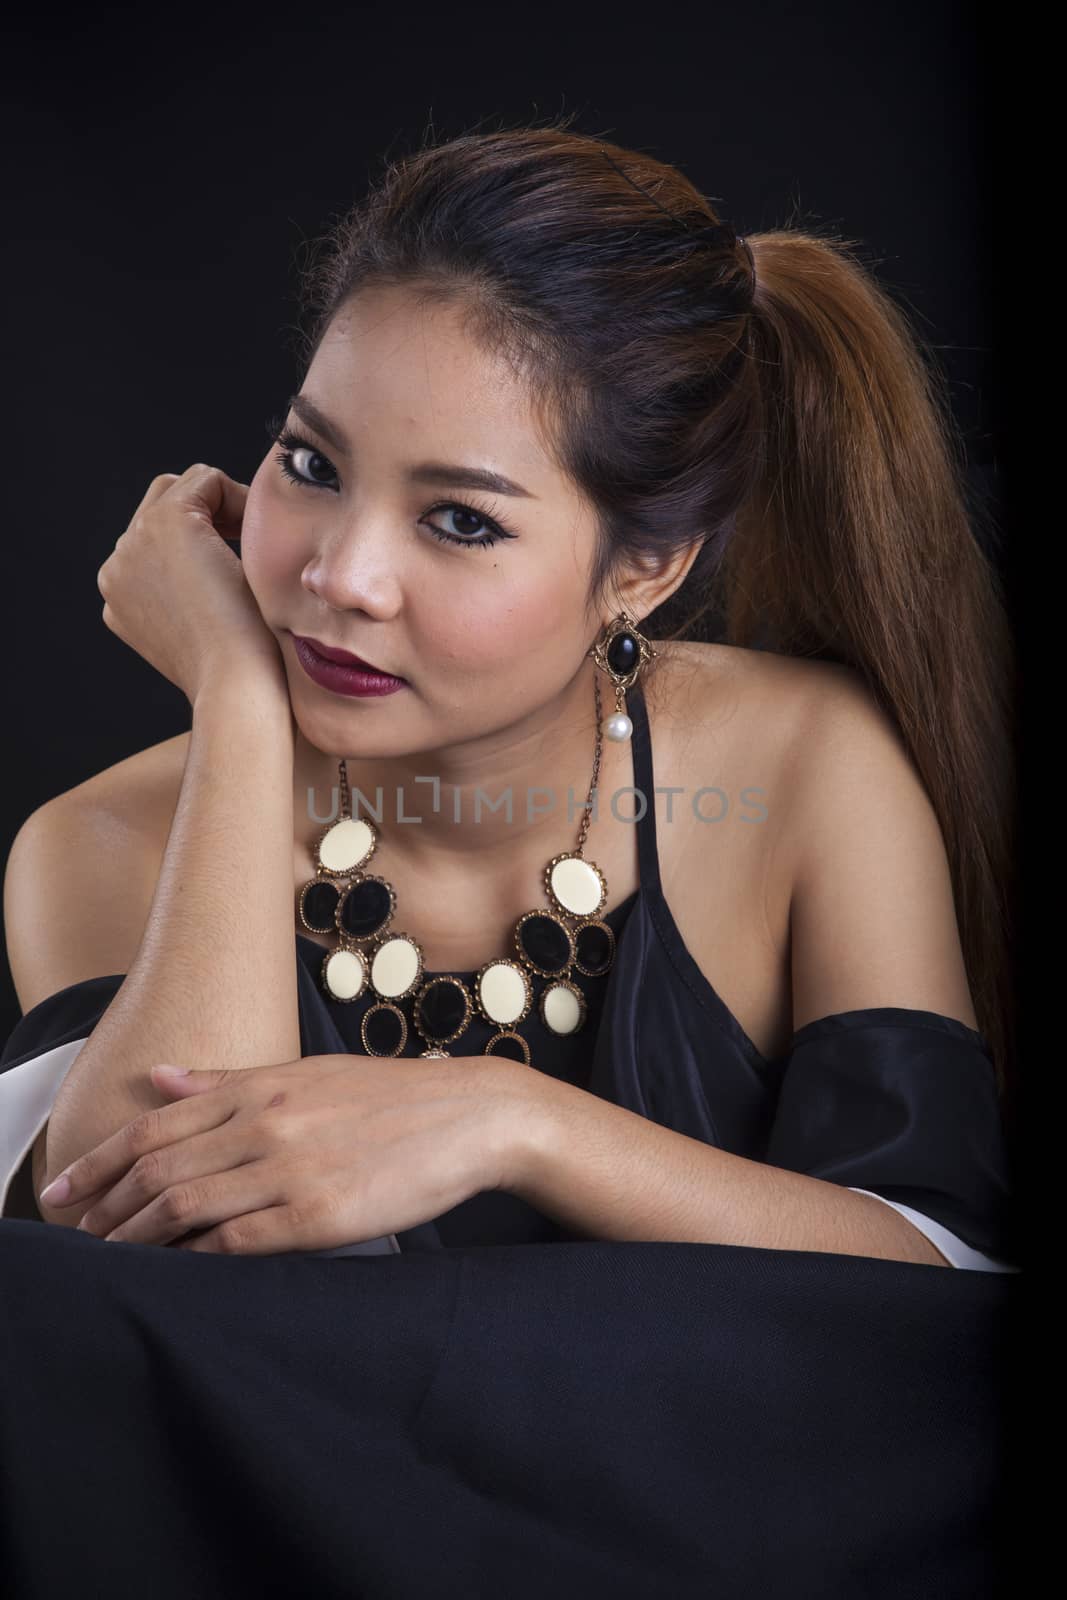 Portrait of young Asian girl - Casual and good looking close-up